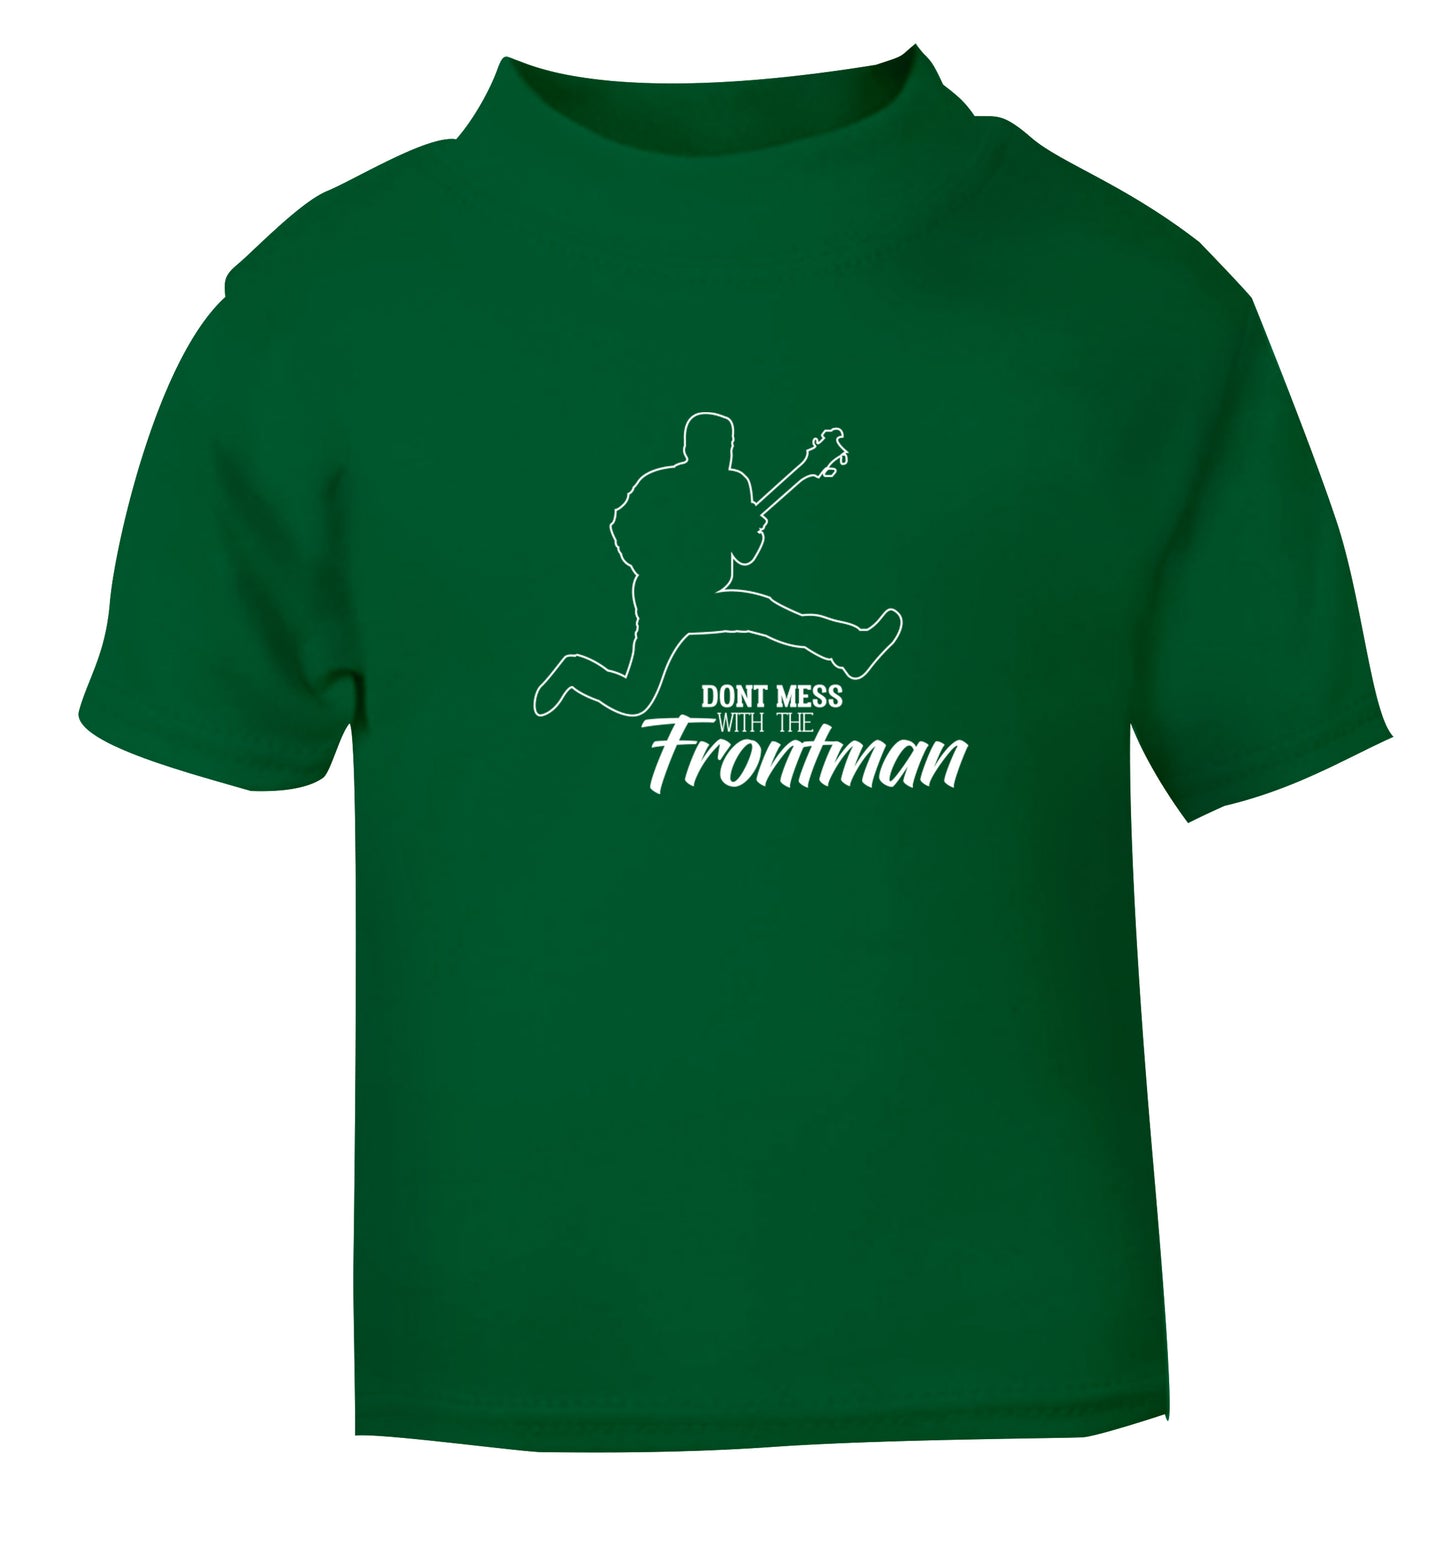 Don't mess with the frontman green Baby Toddler Tshirt 2 Years